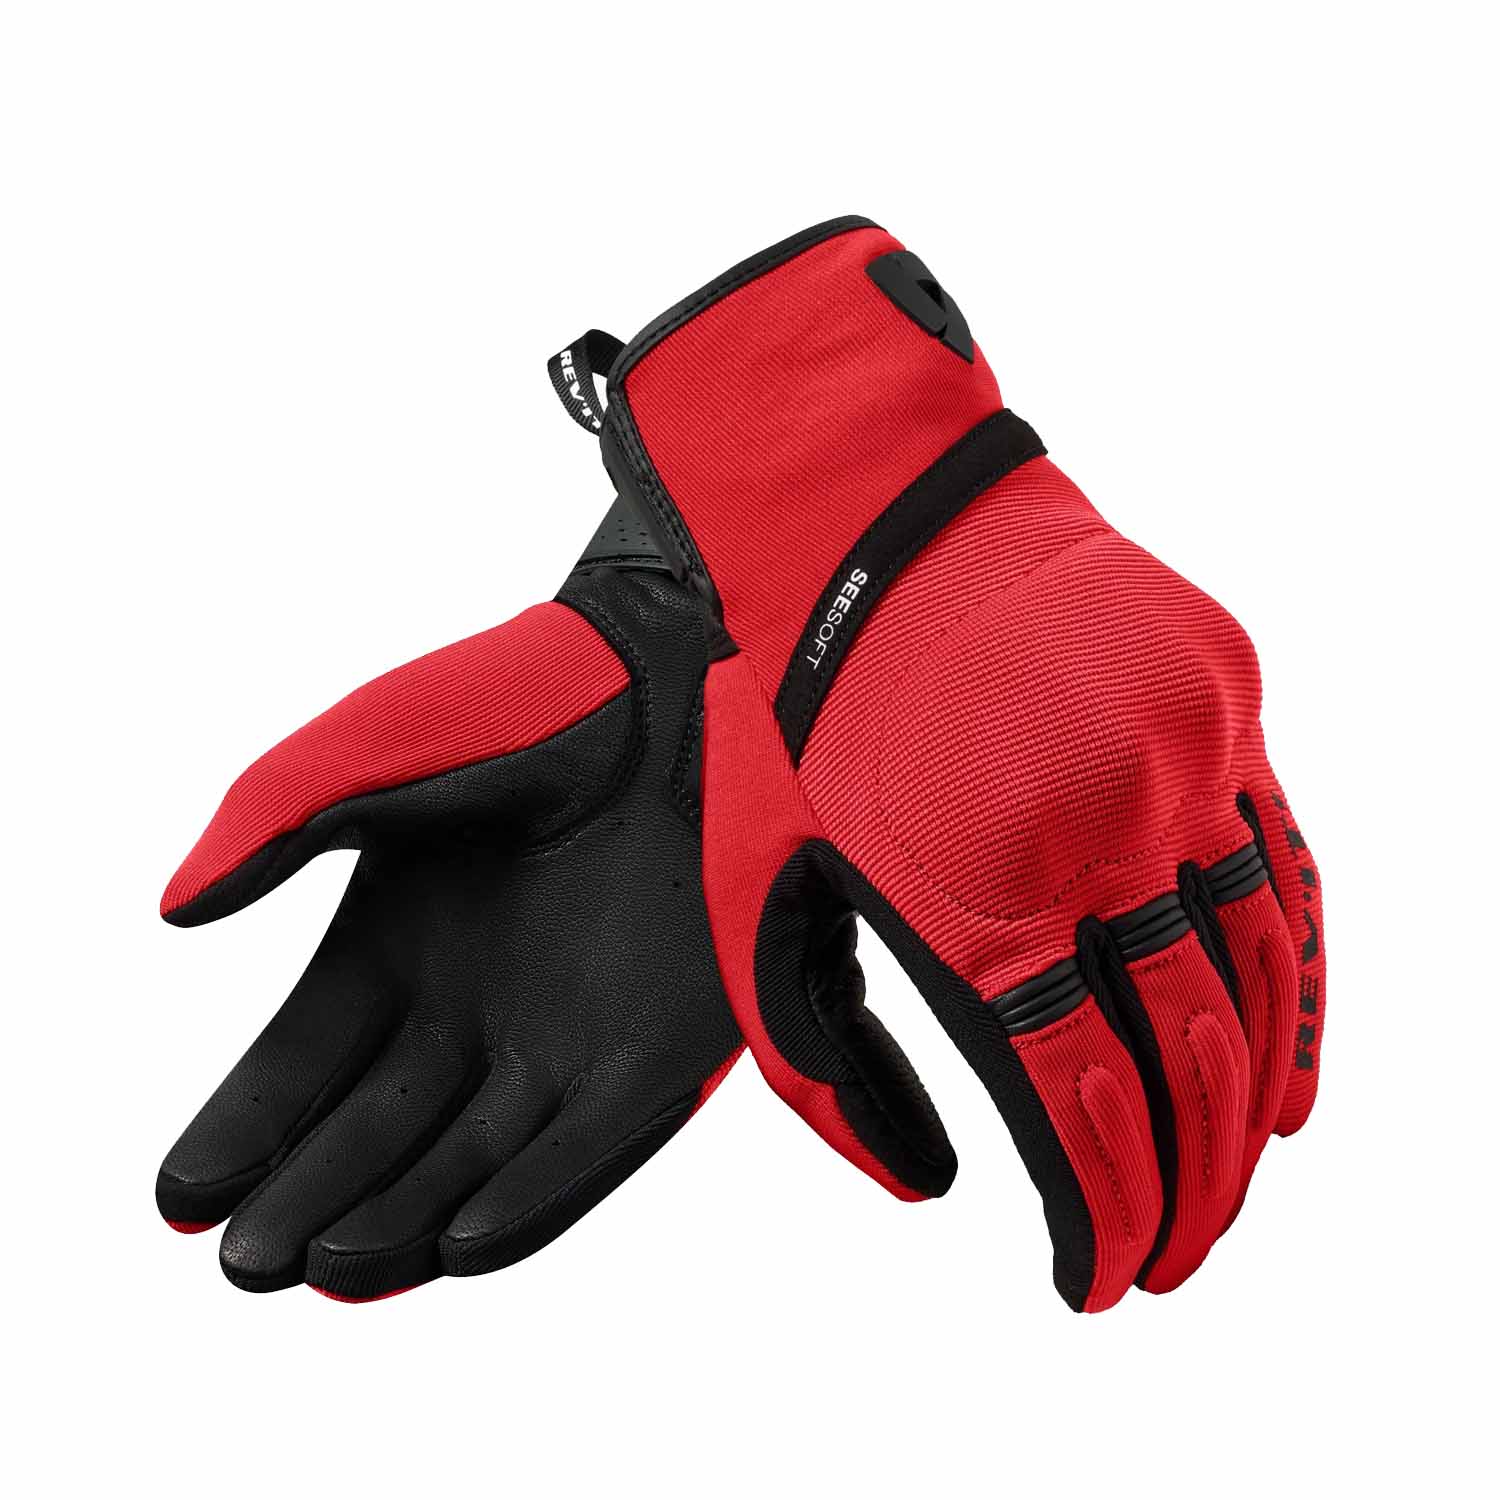 Image of EU REV'IT! Mosca 2 Gloves Red Black Taille 2XL